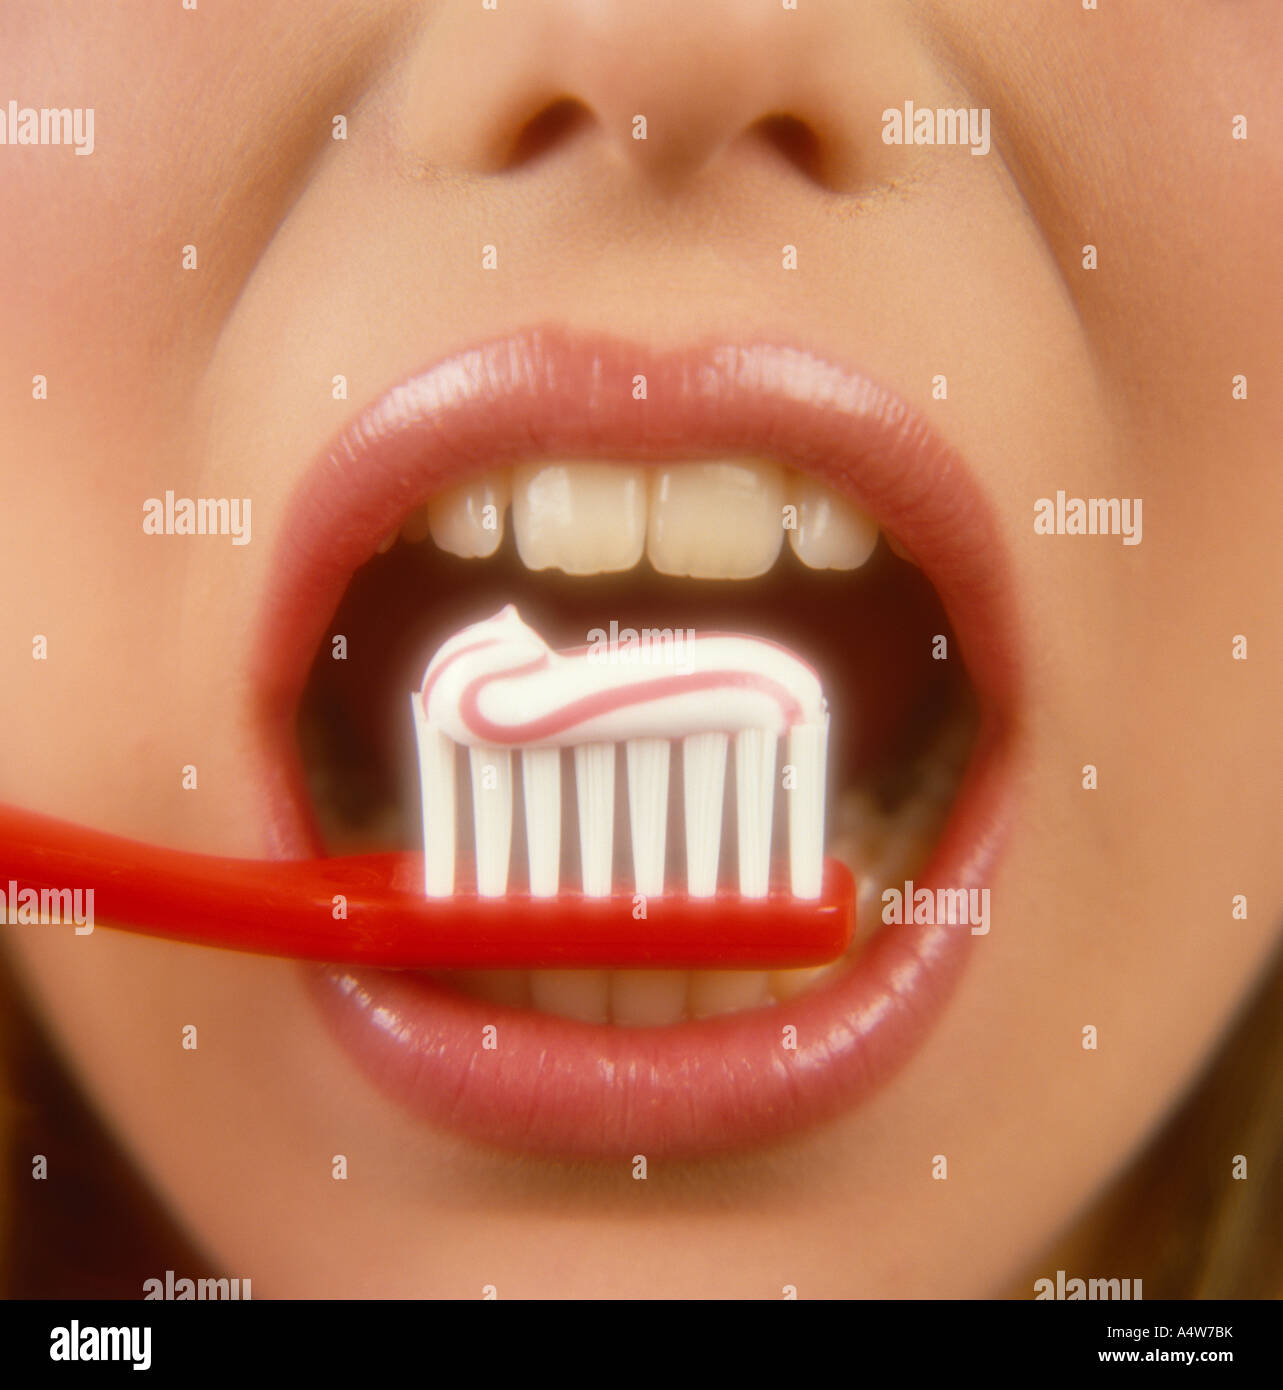 GIRL S MOUTH WITH TOOTHBRUSH PASTE Stock Photo